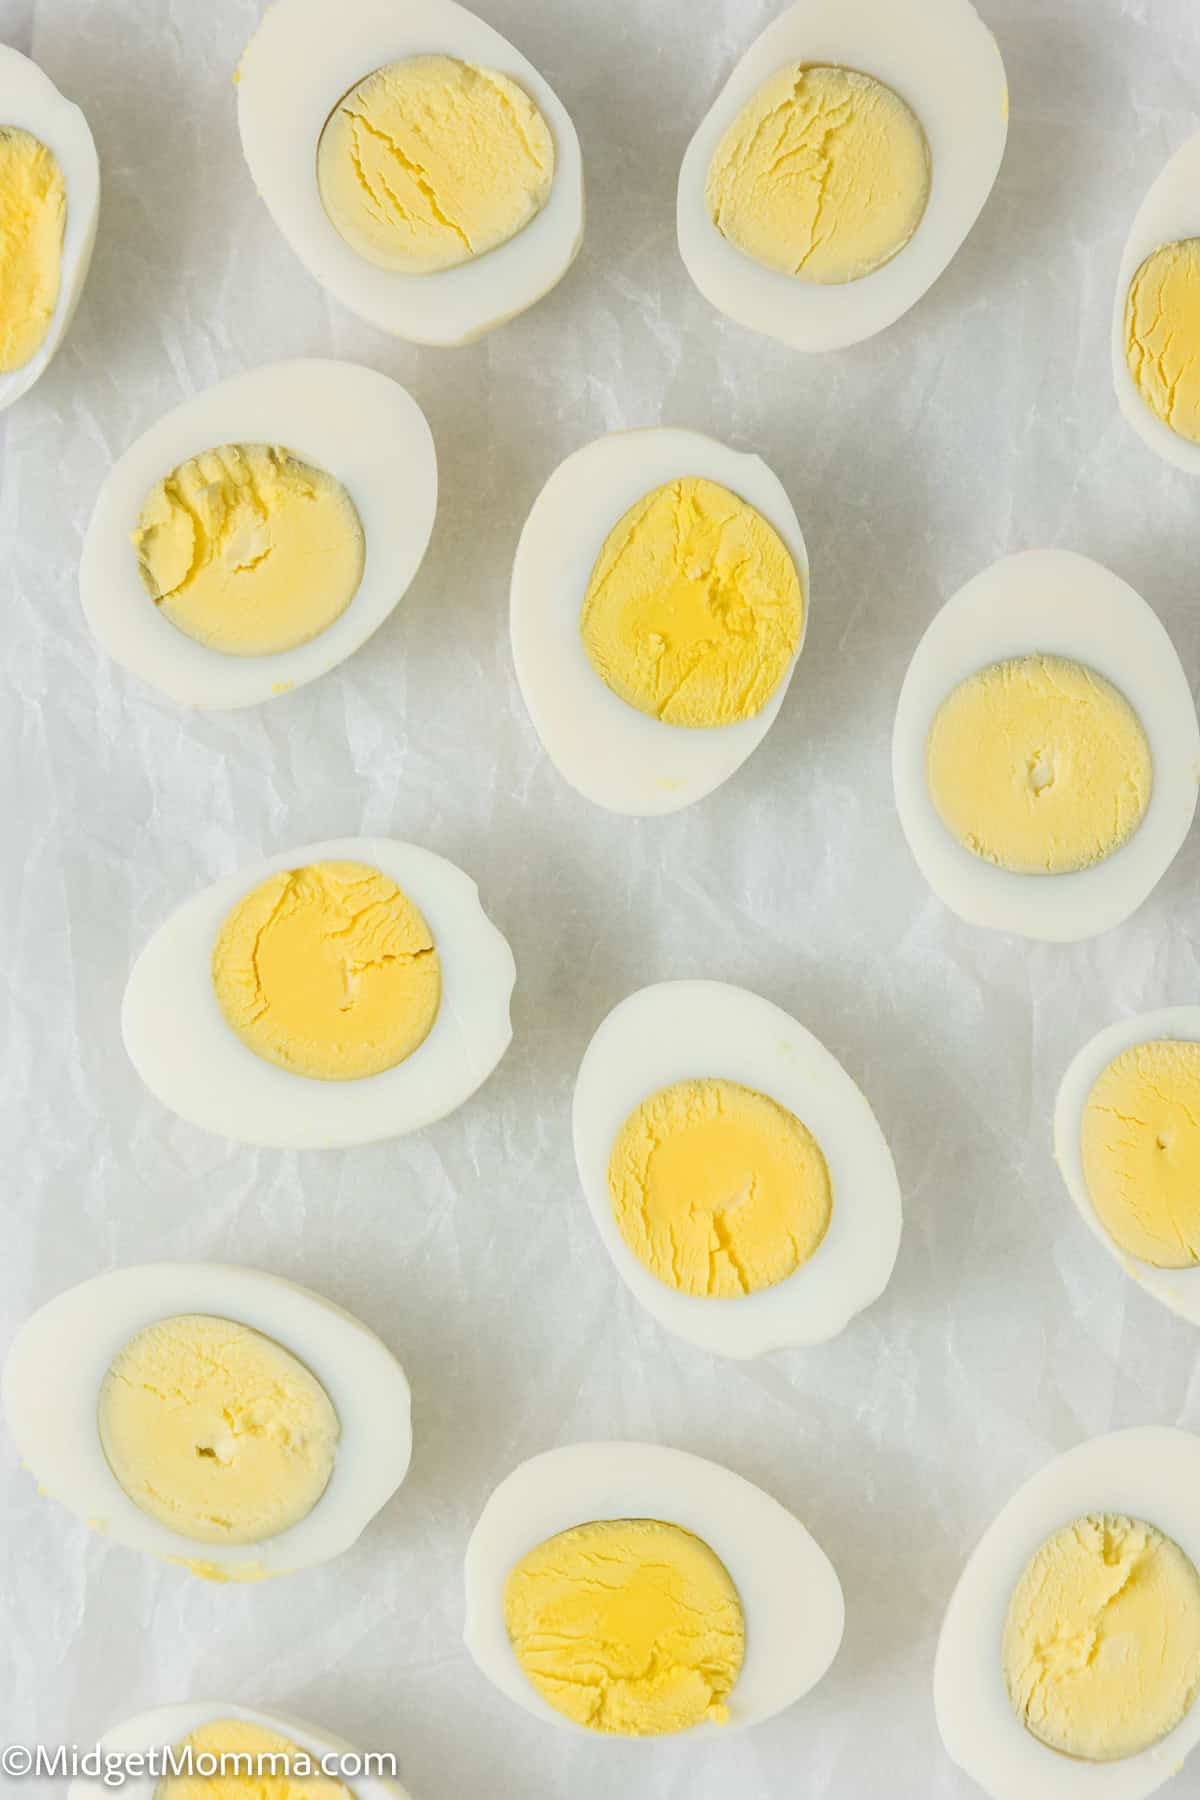 Halved hard-boiled eggs arranged neatly on a crinkled white paper background, showing smooth white exteriors and solid yellow yolks.